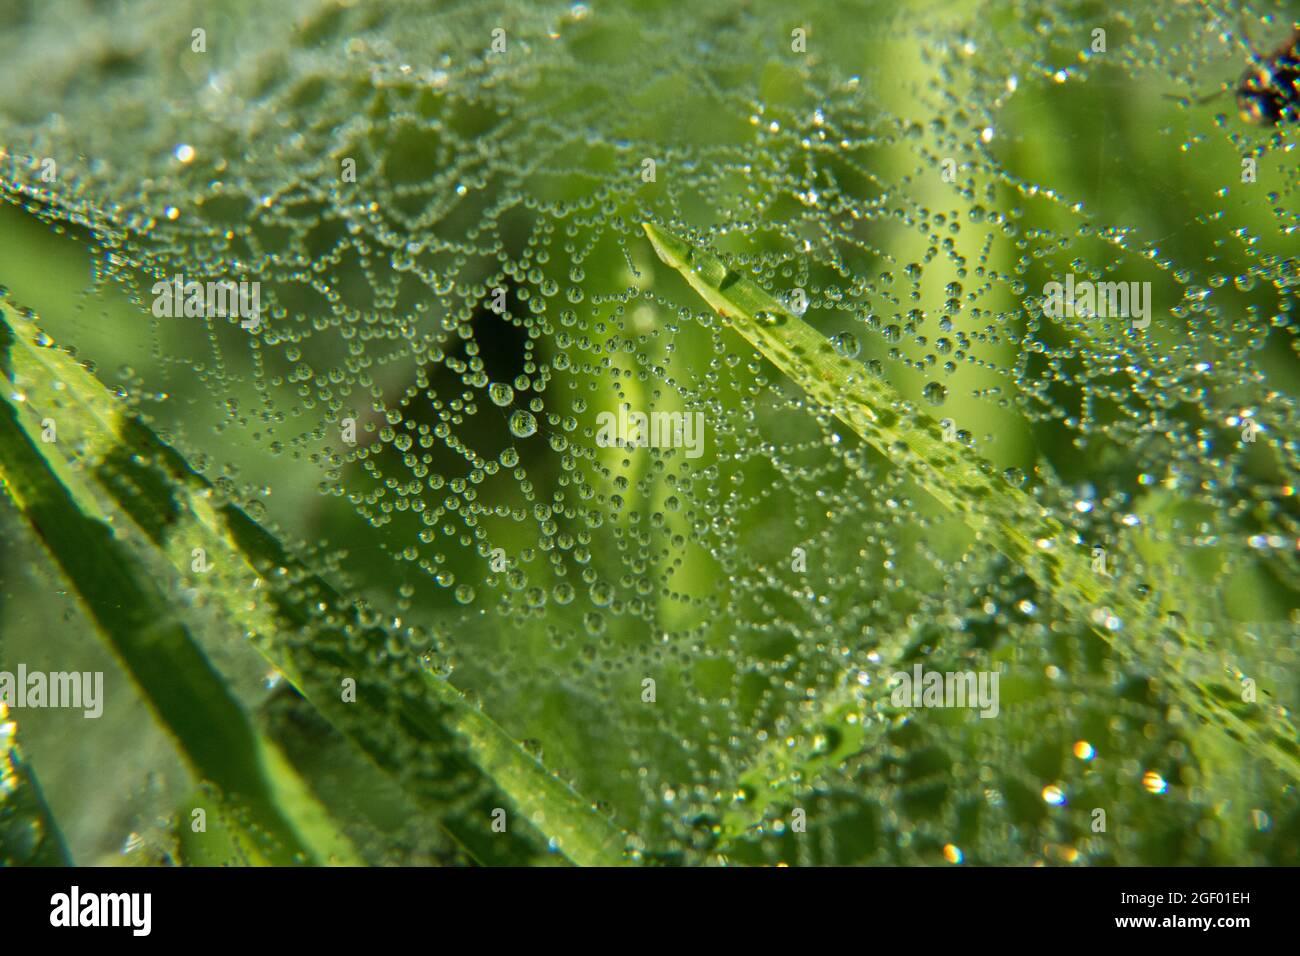 Spider web texture with water drops Stock Photo